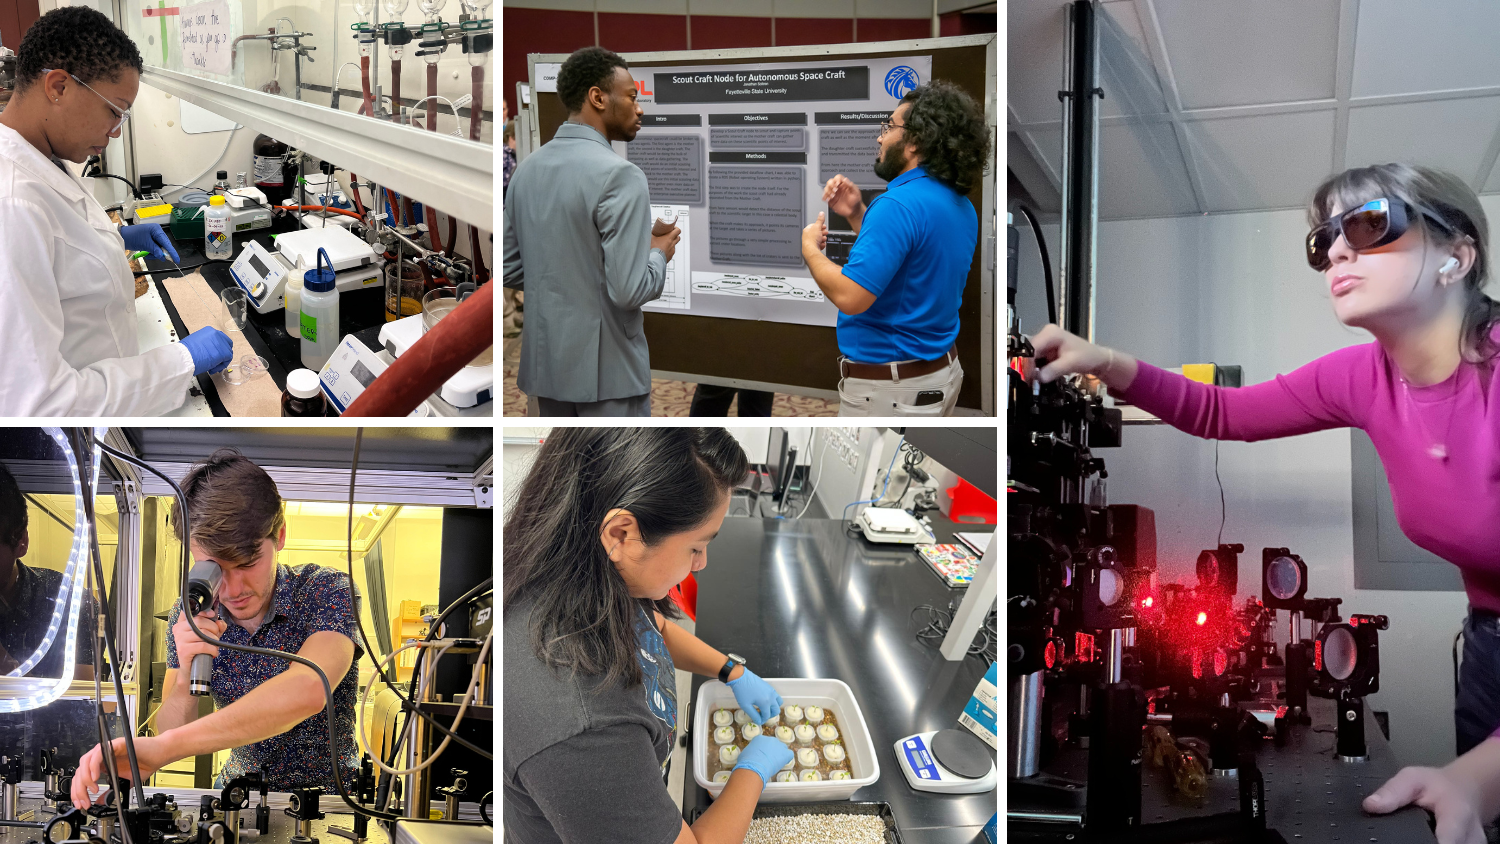 Past Graduate Research Fellows and Undergraduate Research Scholars conducted impressive research in science, technology, engineering, and mathematics (STEM).